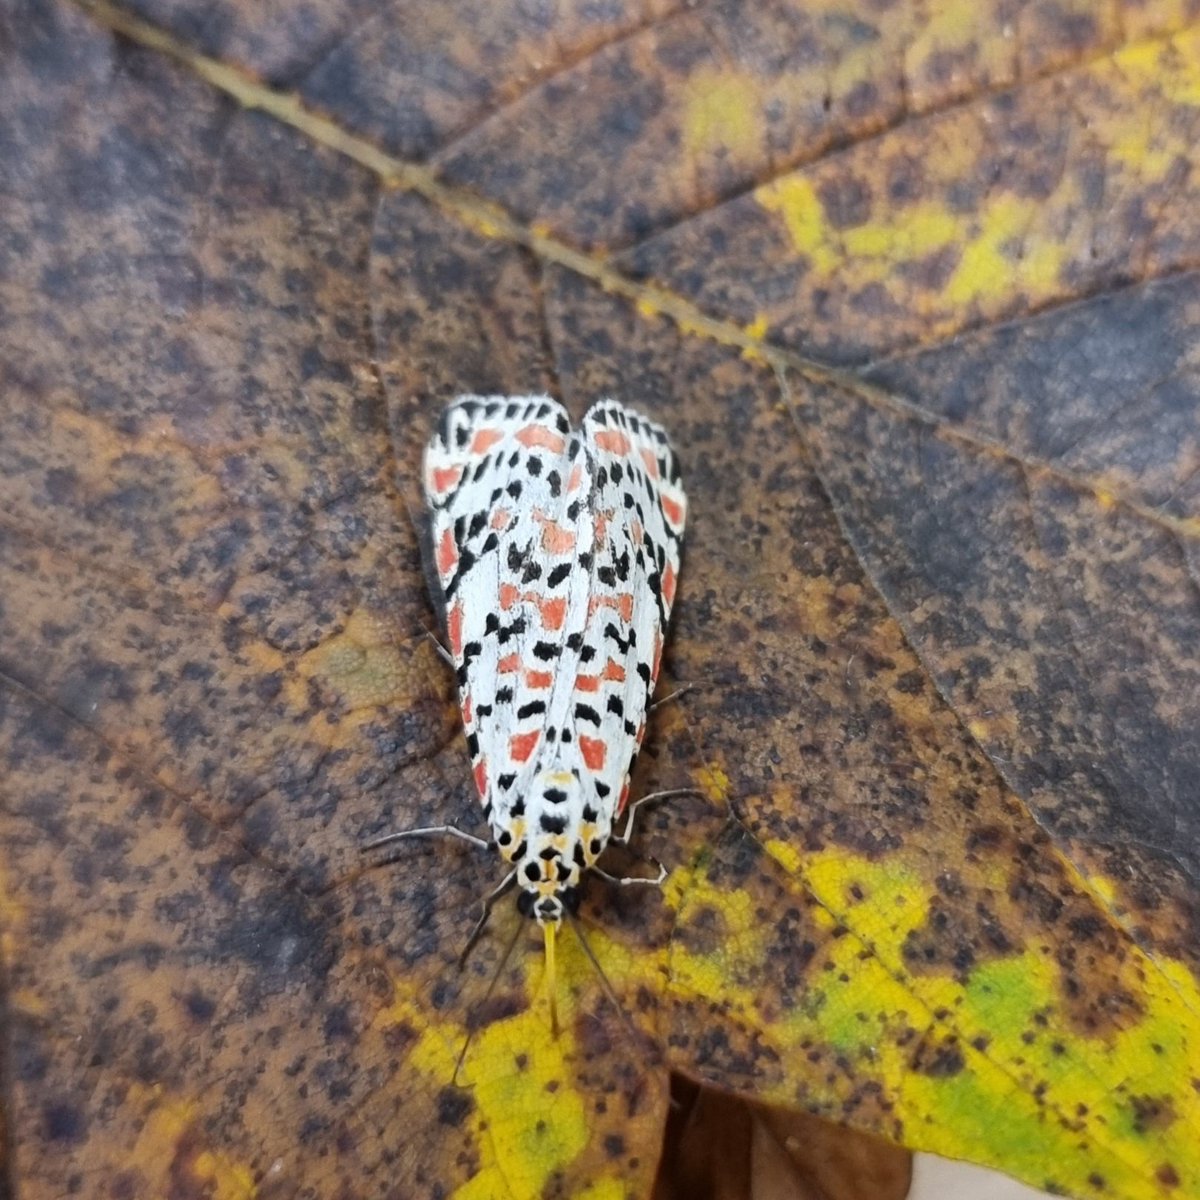 Glad to join in on the crimson speckled craze with this one trapped by Nige Lound over night at Gibraltar Point